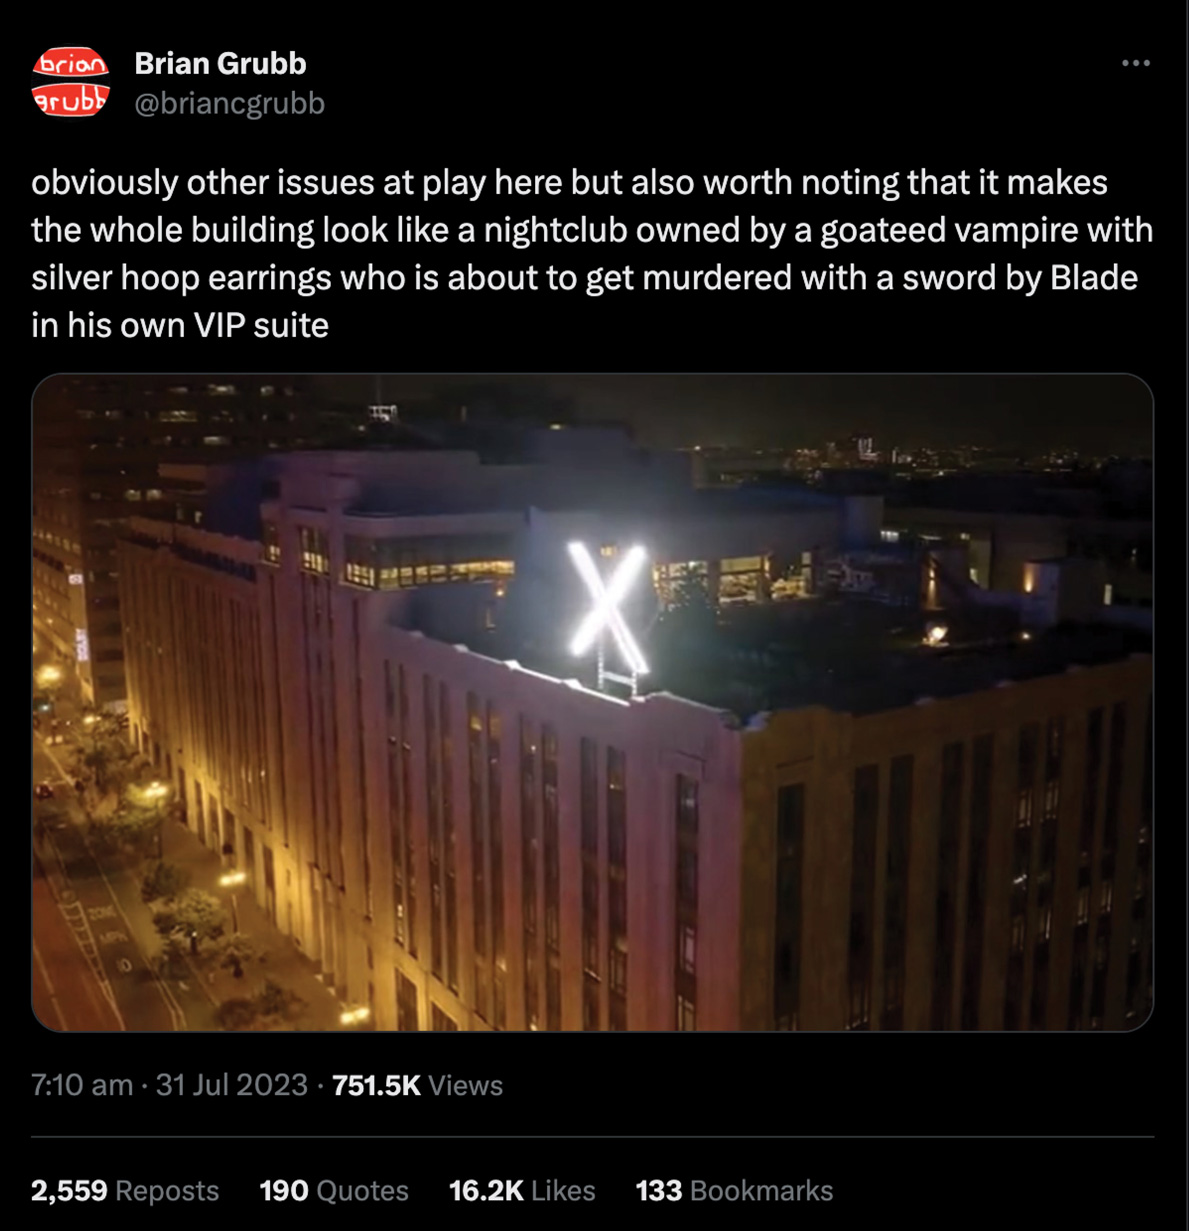 Tweet from @briancgrubb with the caption 'obviously other issues at play here but also worth noting that it makes the whole building look like a nightclub owned by a goateed vampire with silver hoop earrings who is about to get murdered with a sword by Blade in his own VIP suite'. The attached image is of a very bright X sign on top of a building